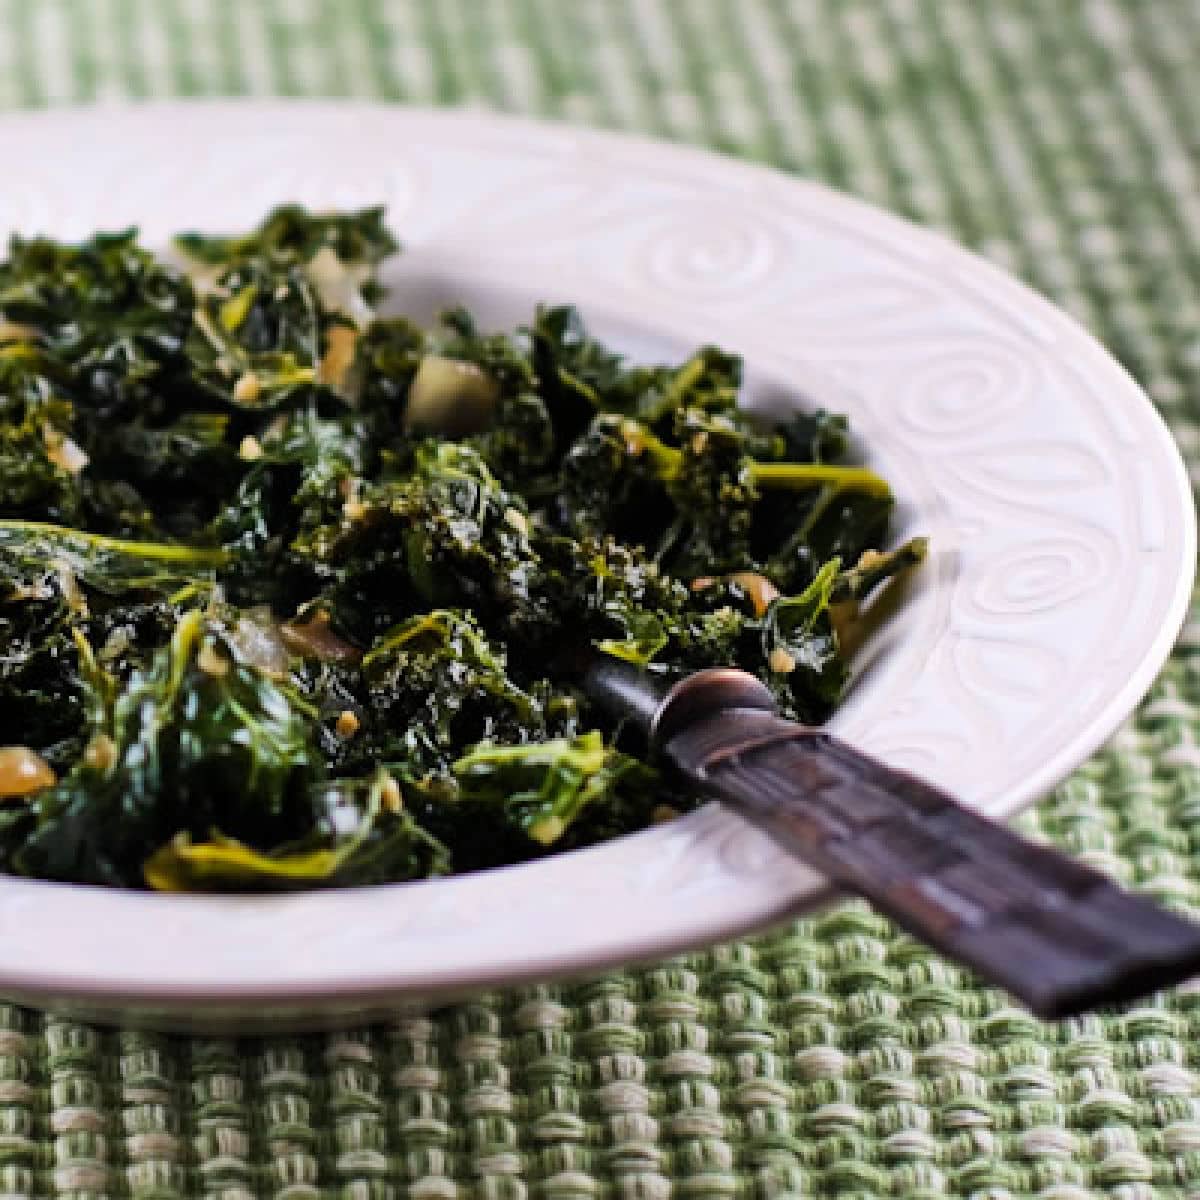 Square image for Sauteed Kale with Garlic and Onion shown in serving bowl with spoon.